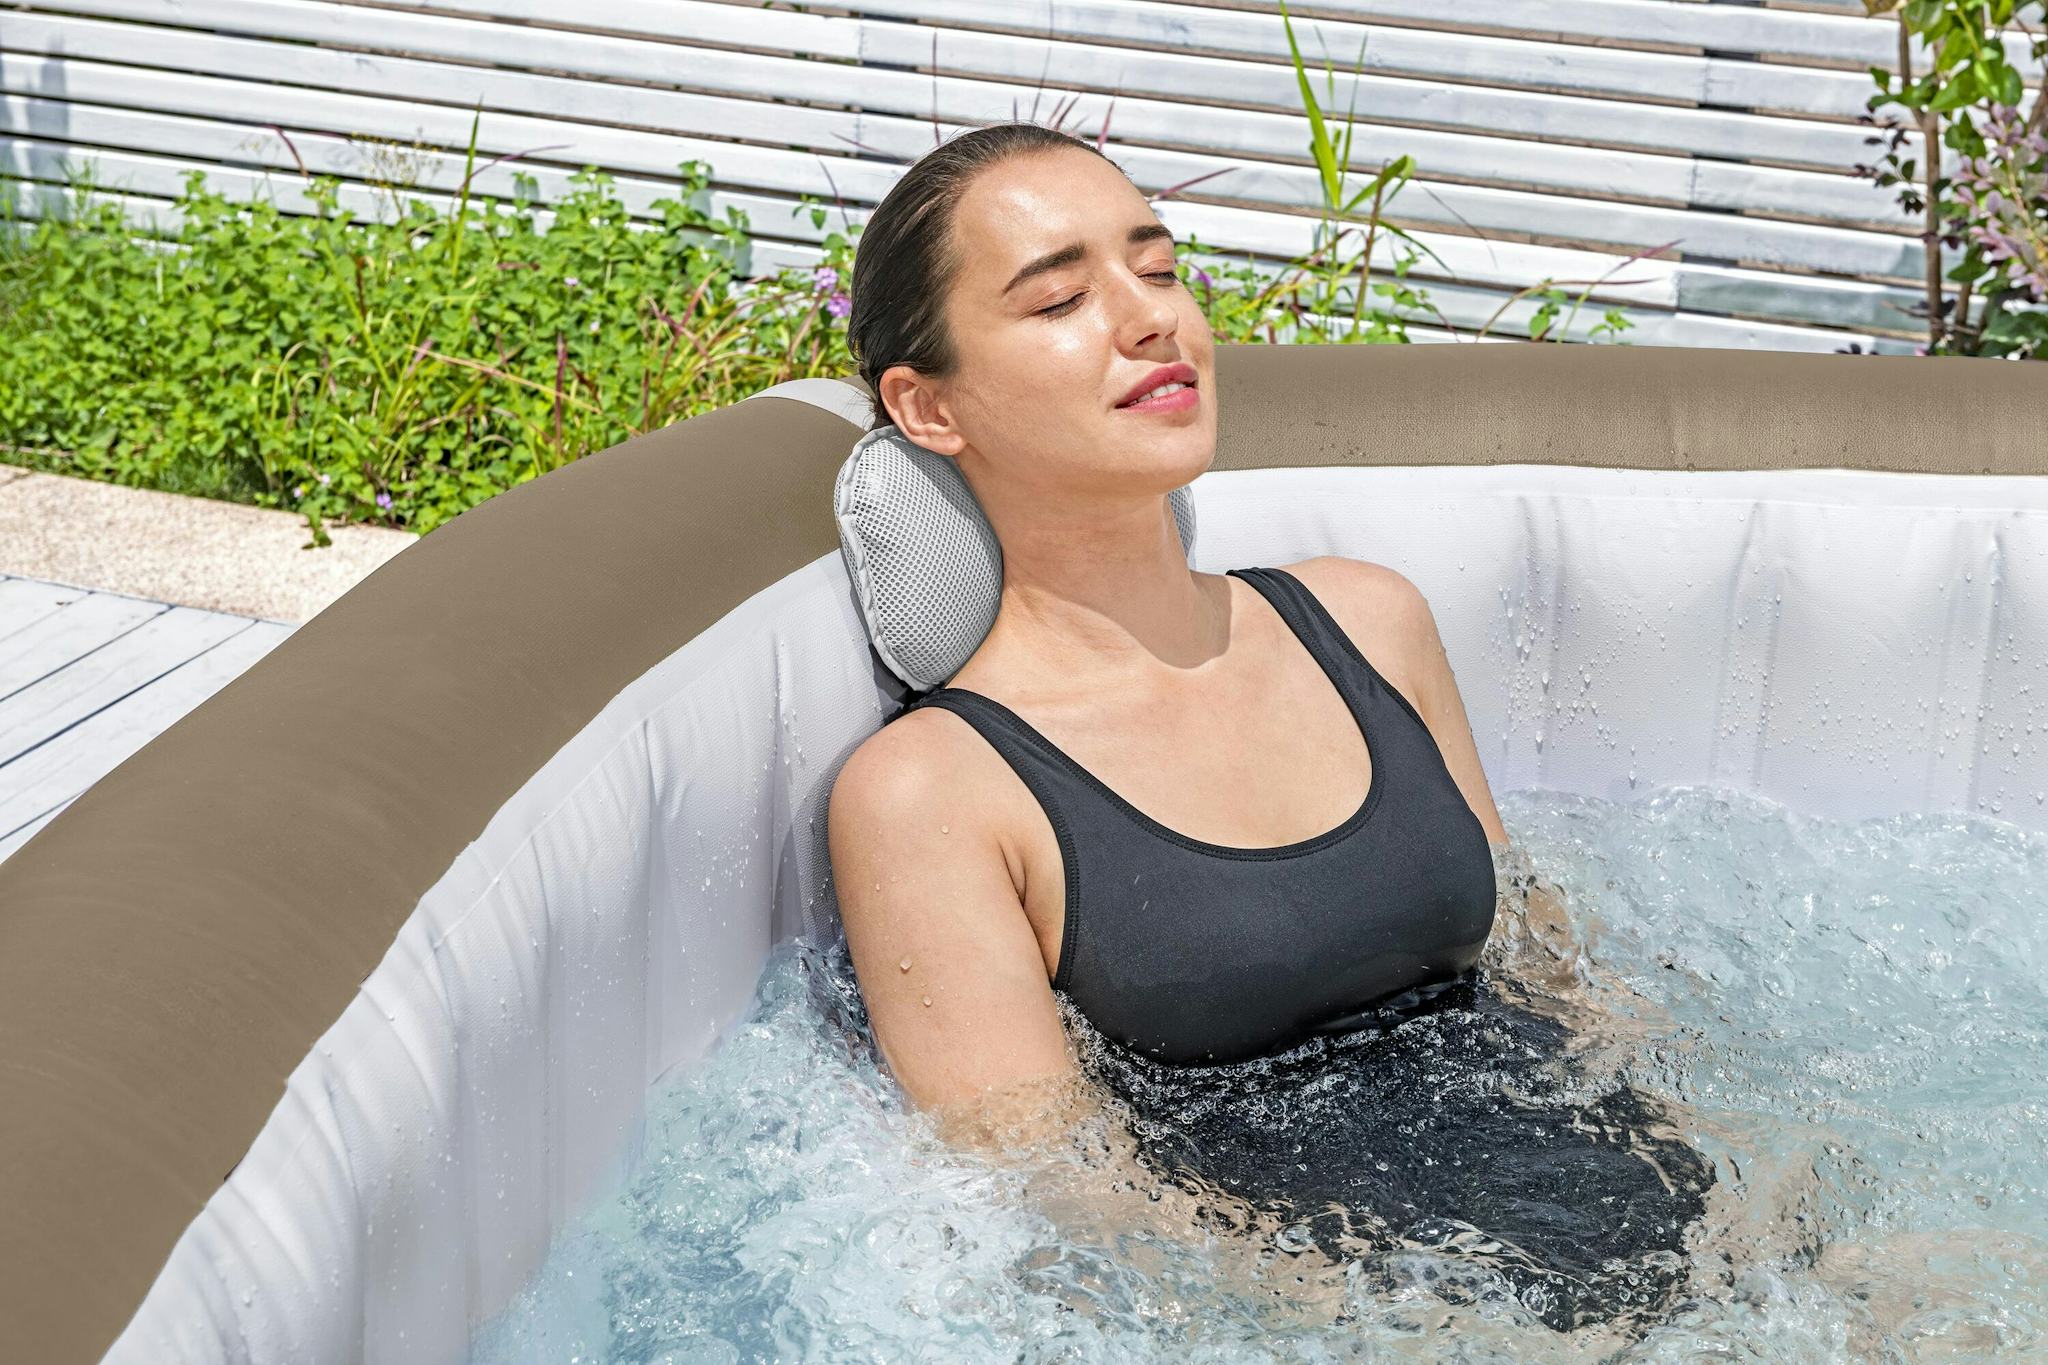 Spas Gonflables Spa gonflable carré Lay-Z-Spa® Palma Hydrojet Pro™ 5 - 7 places Bestway 9